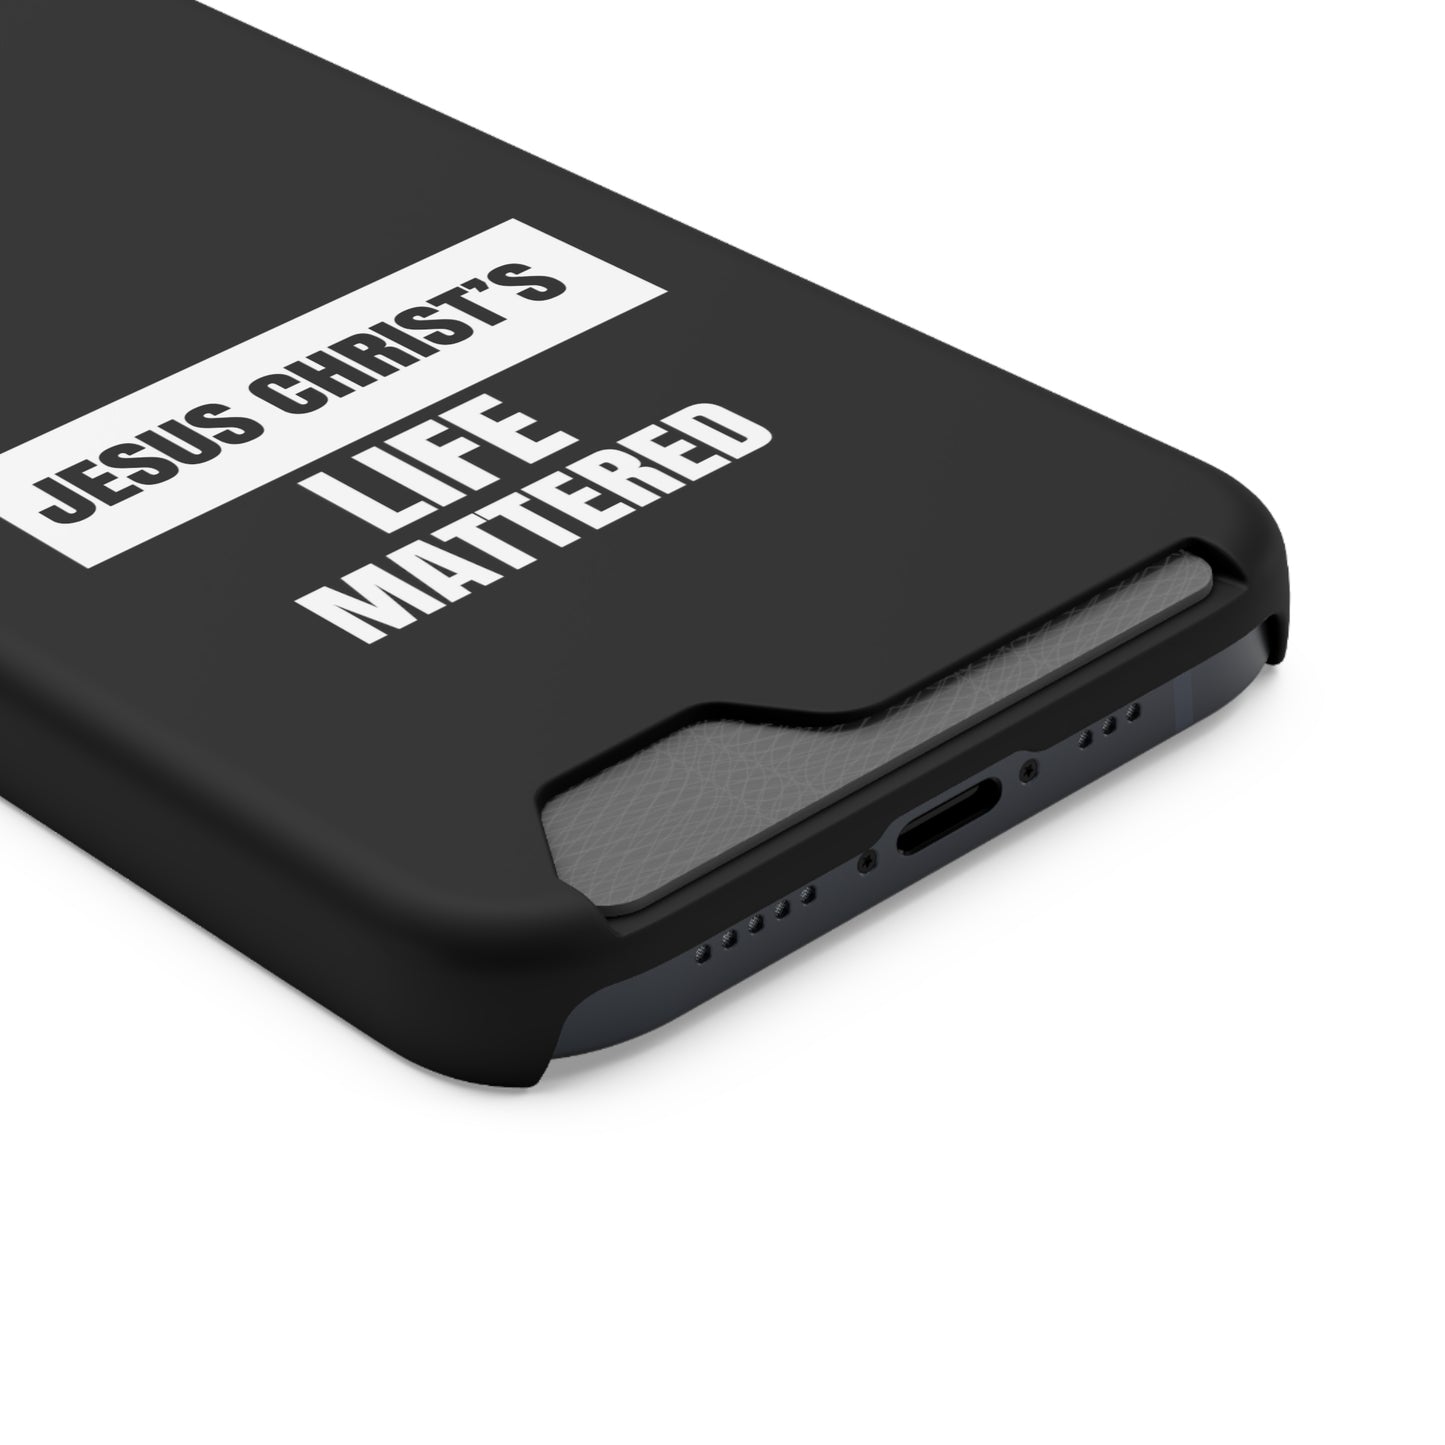 Jesus Christ's Life Mattered Phone Case With Card Holder Printify